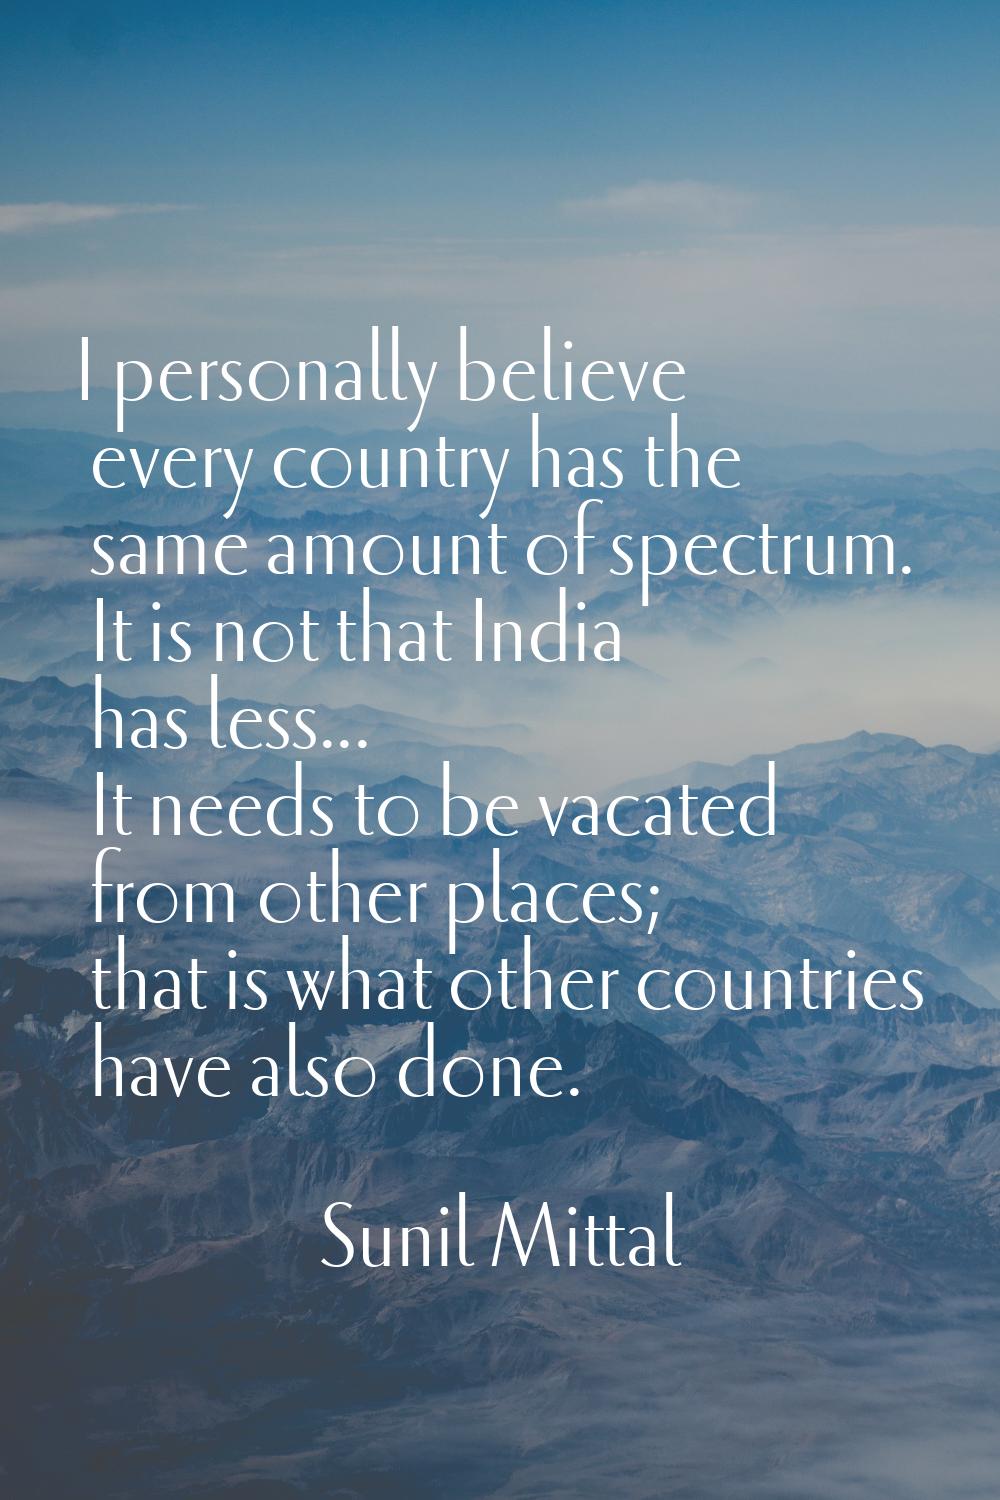 I personally believe every country has the same amount of spectrum. It is not that India has less..